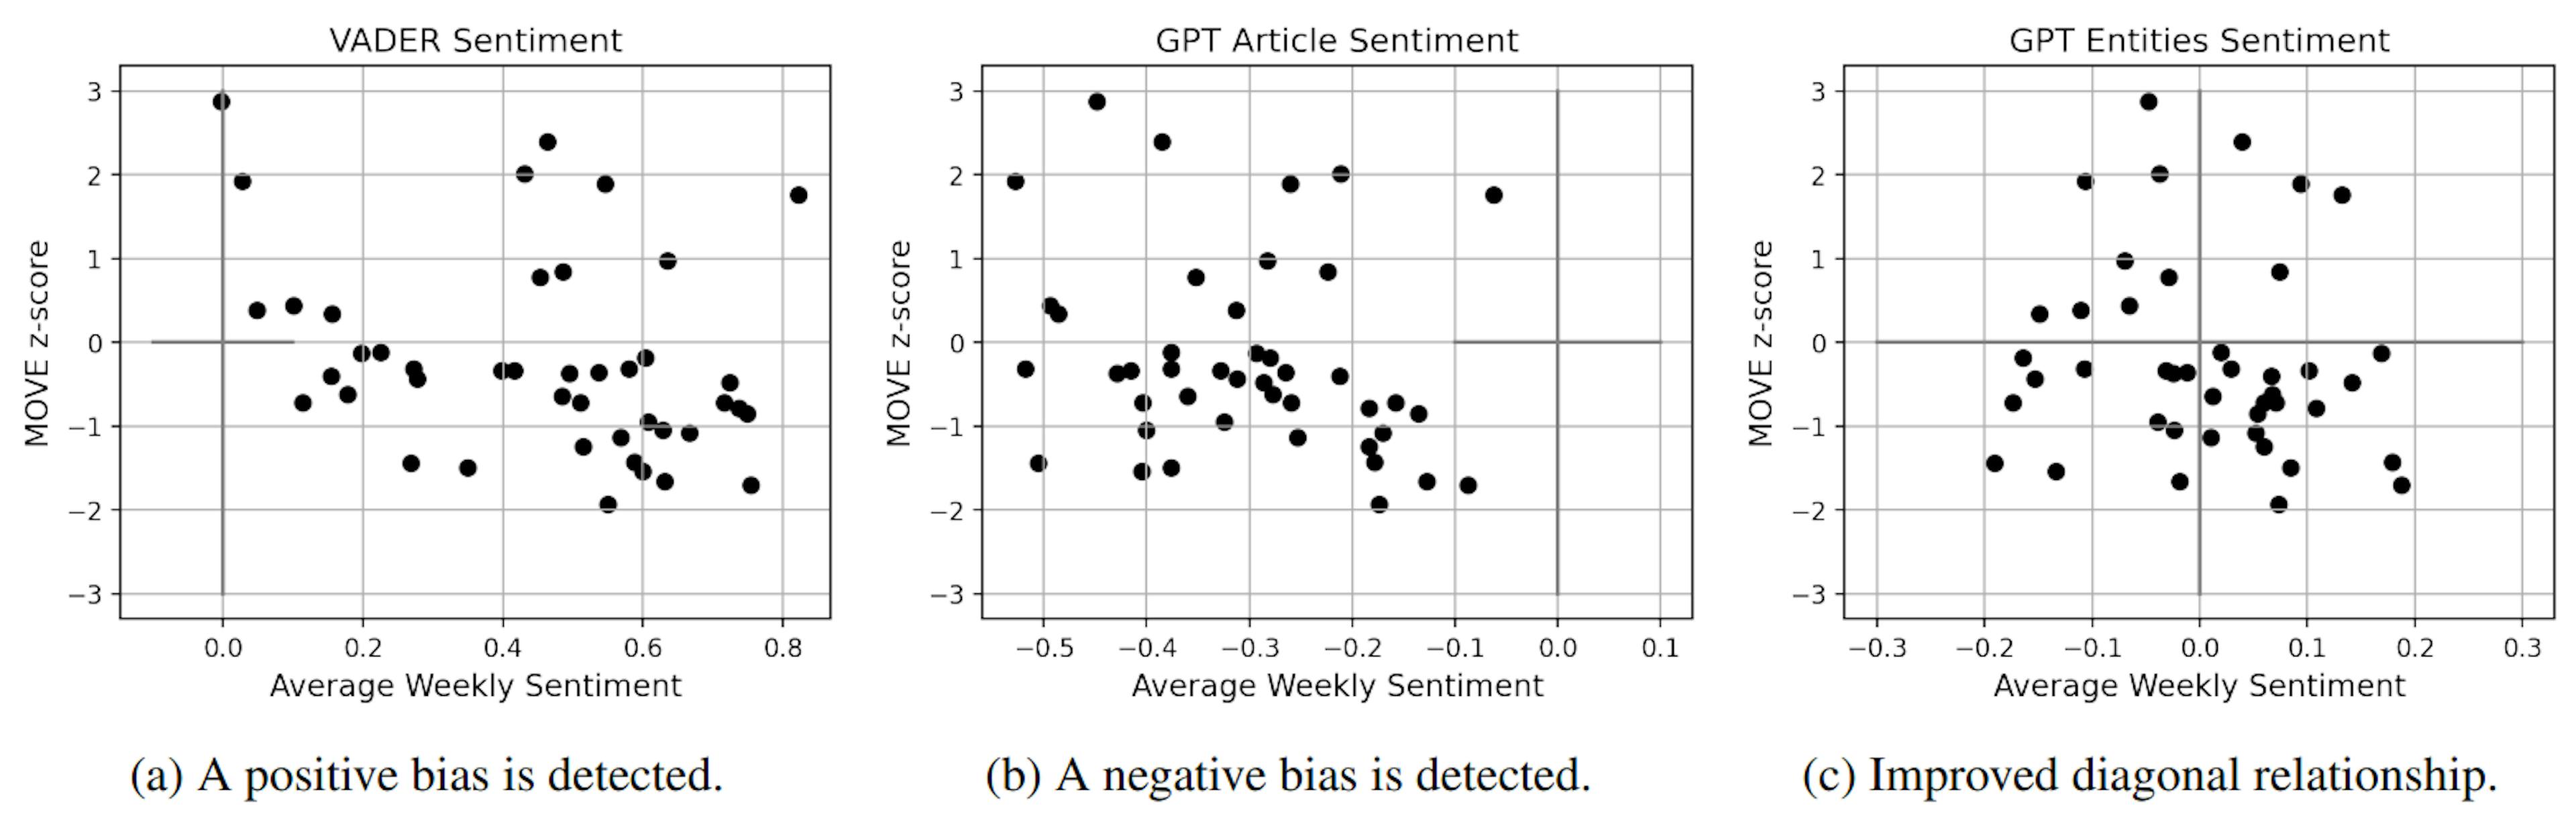 Figure 4: Weekly MOVE Index z-scores against average sentiment of news on each week, for subsets of articles relevant to the bond market. The primitive VADER sentiment analysis technique shows a positive bias, while GPT sentimentcalculated for whole articles averages to an opposite negative bias. Since the period considered is not uniformly negative,
we are instead satisfied with our proposed entities-based sentiment. This is indeed much more symmetric, despite
carries a tail of noise in the third quadrant that we believe spills from the overall negative GPT bias.
